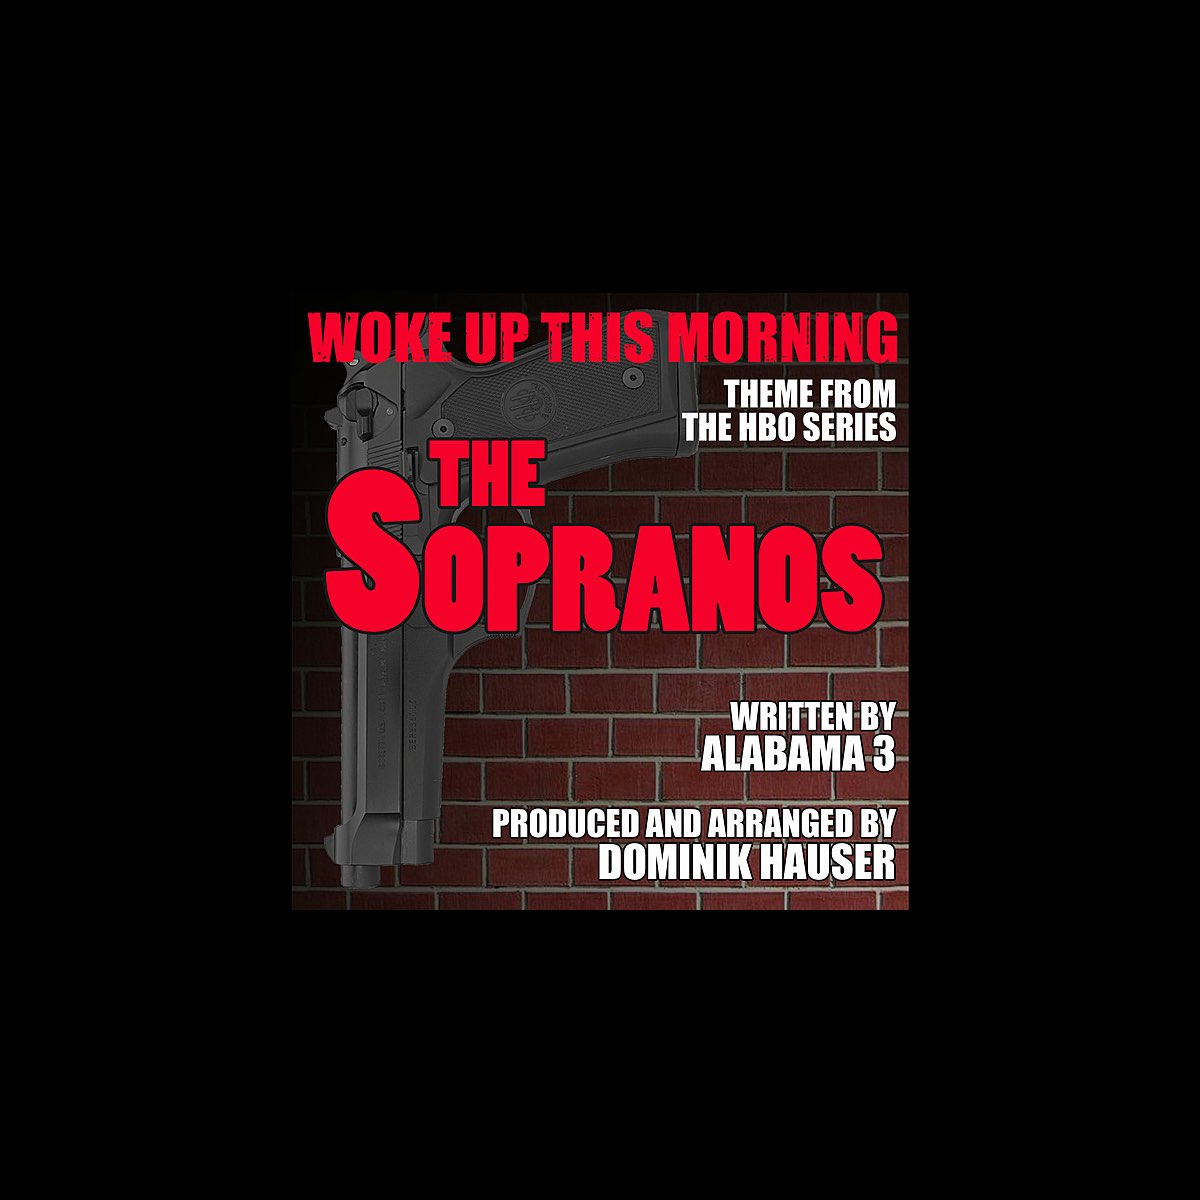 The Sopranos: "Woke Up This Morning" - Theme from the HBO series (Single)  (Alabama 3) by Dominik Hauser on Apple Music